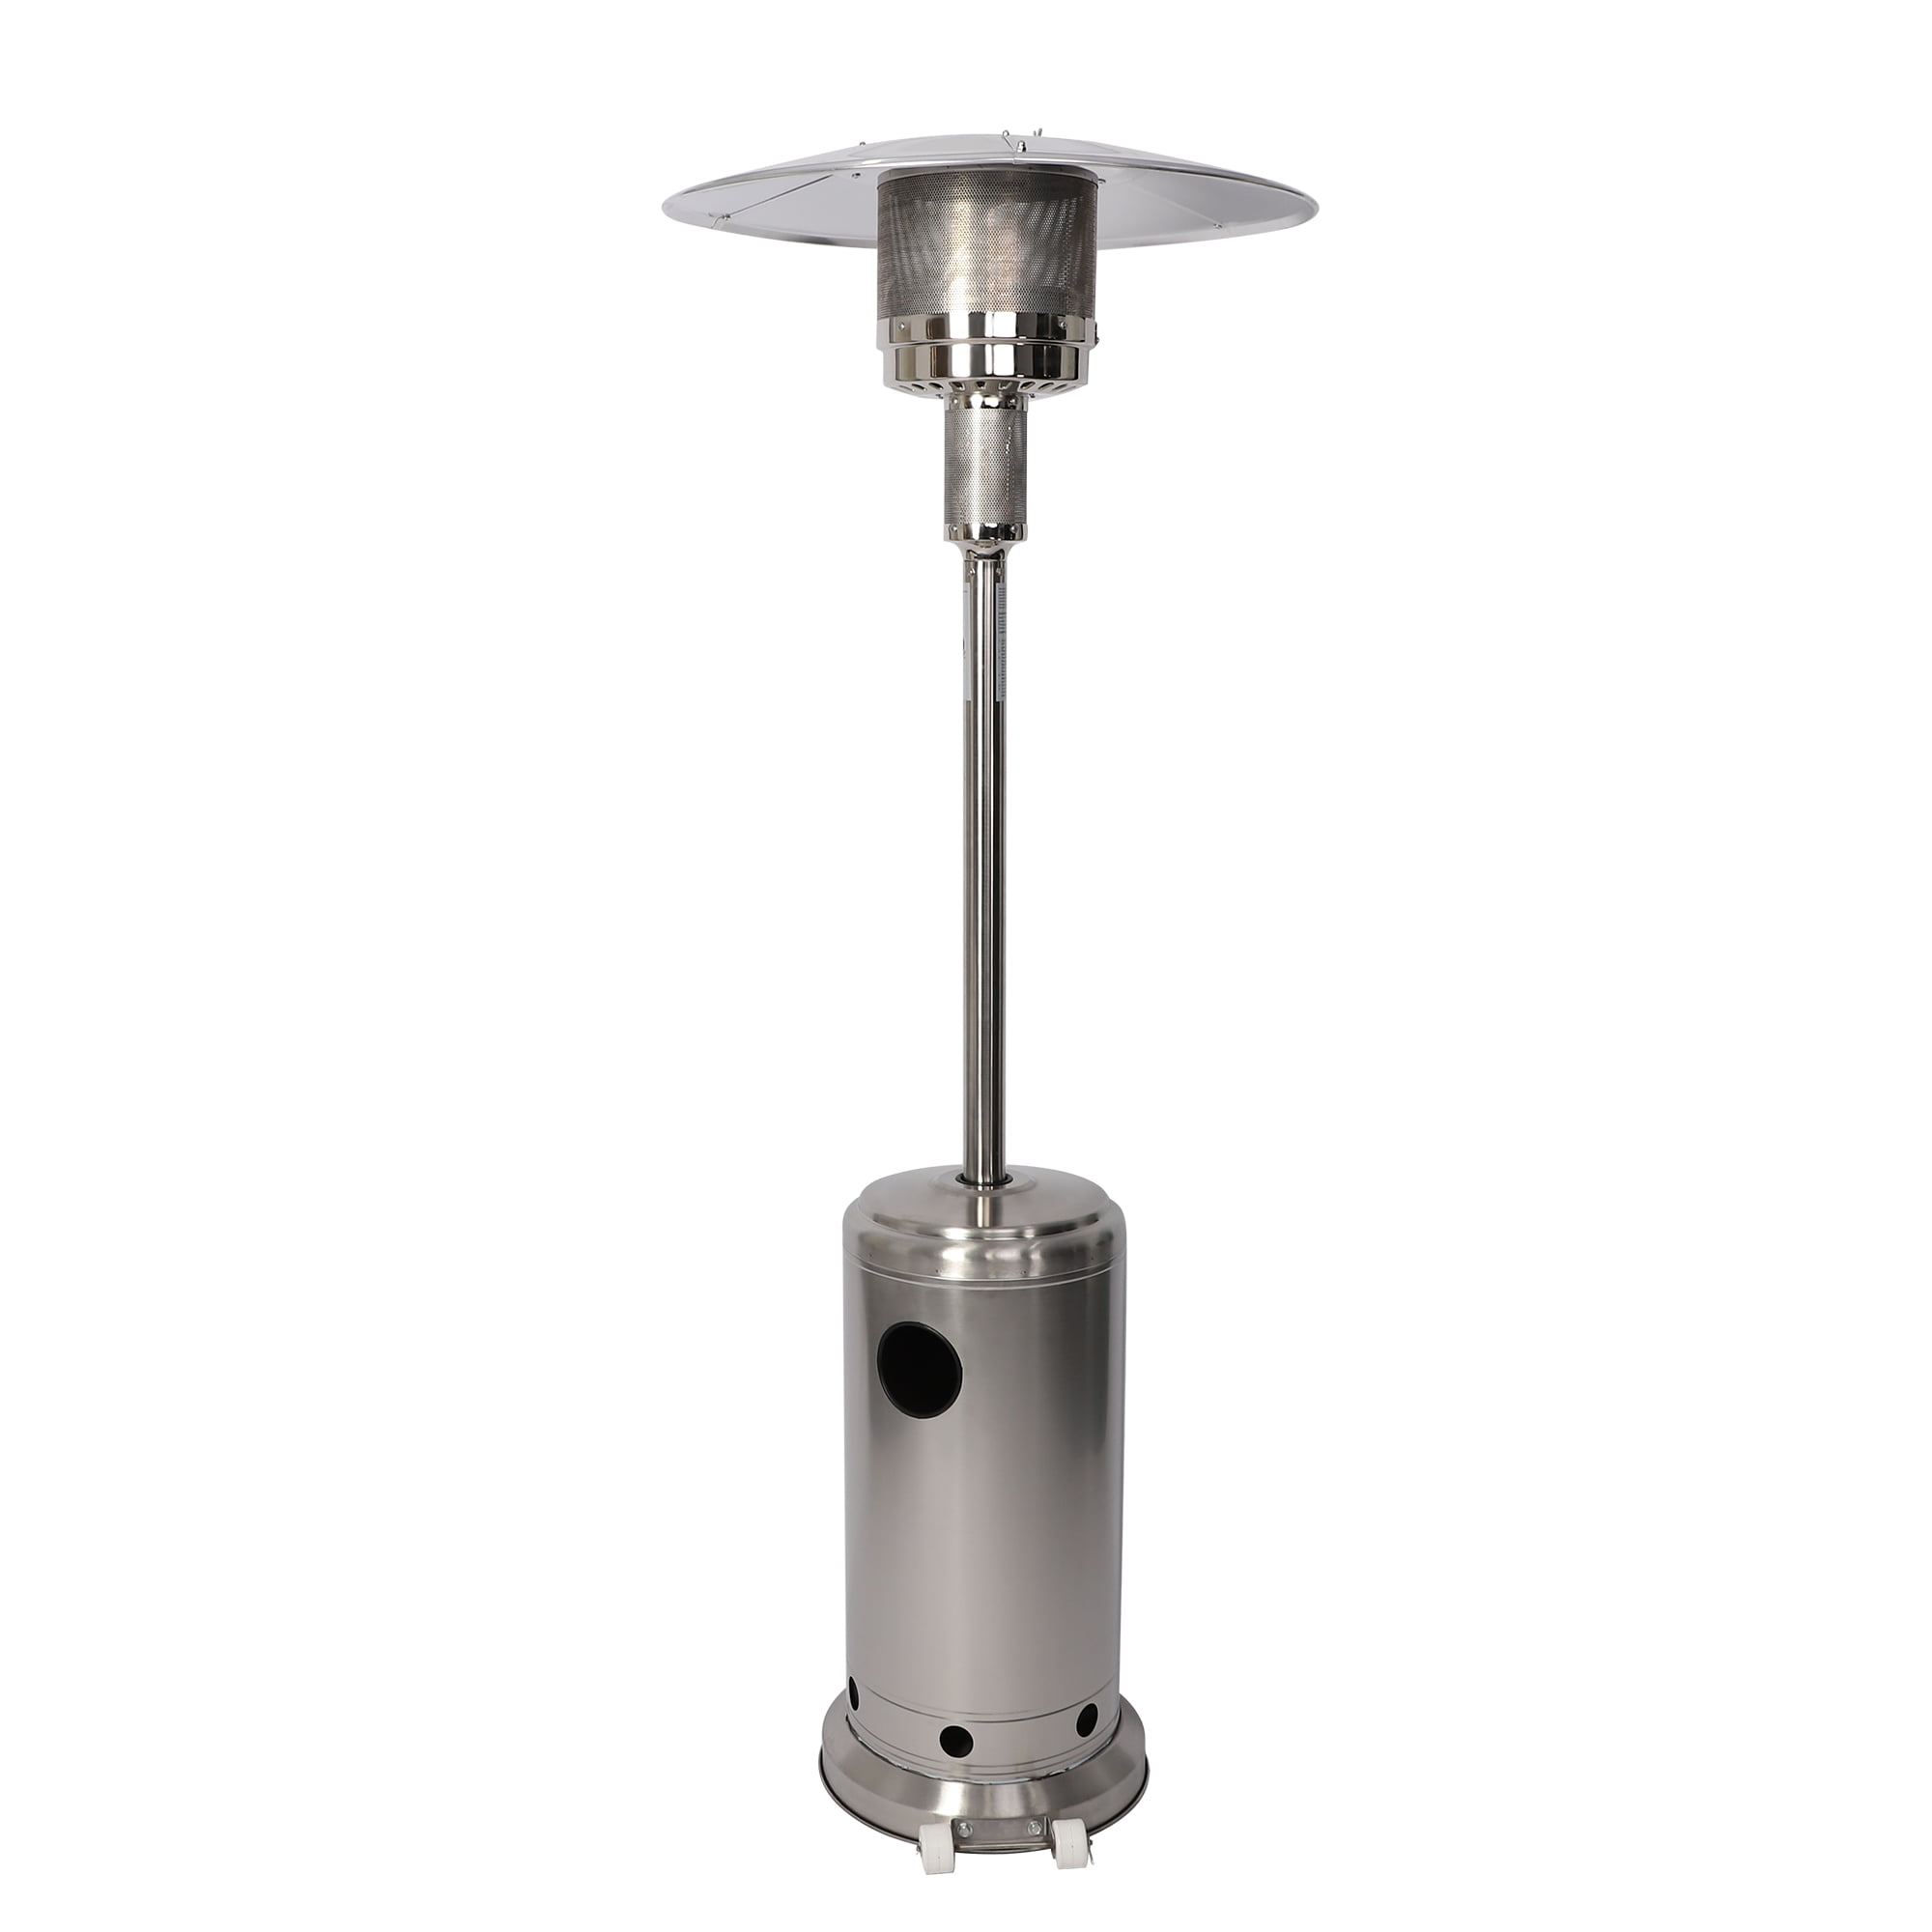 Stainless Steel Patio Heater Propane Outdoor Heater with